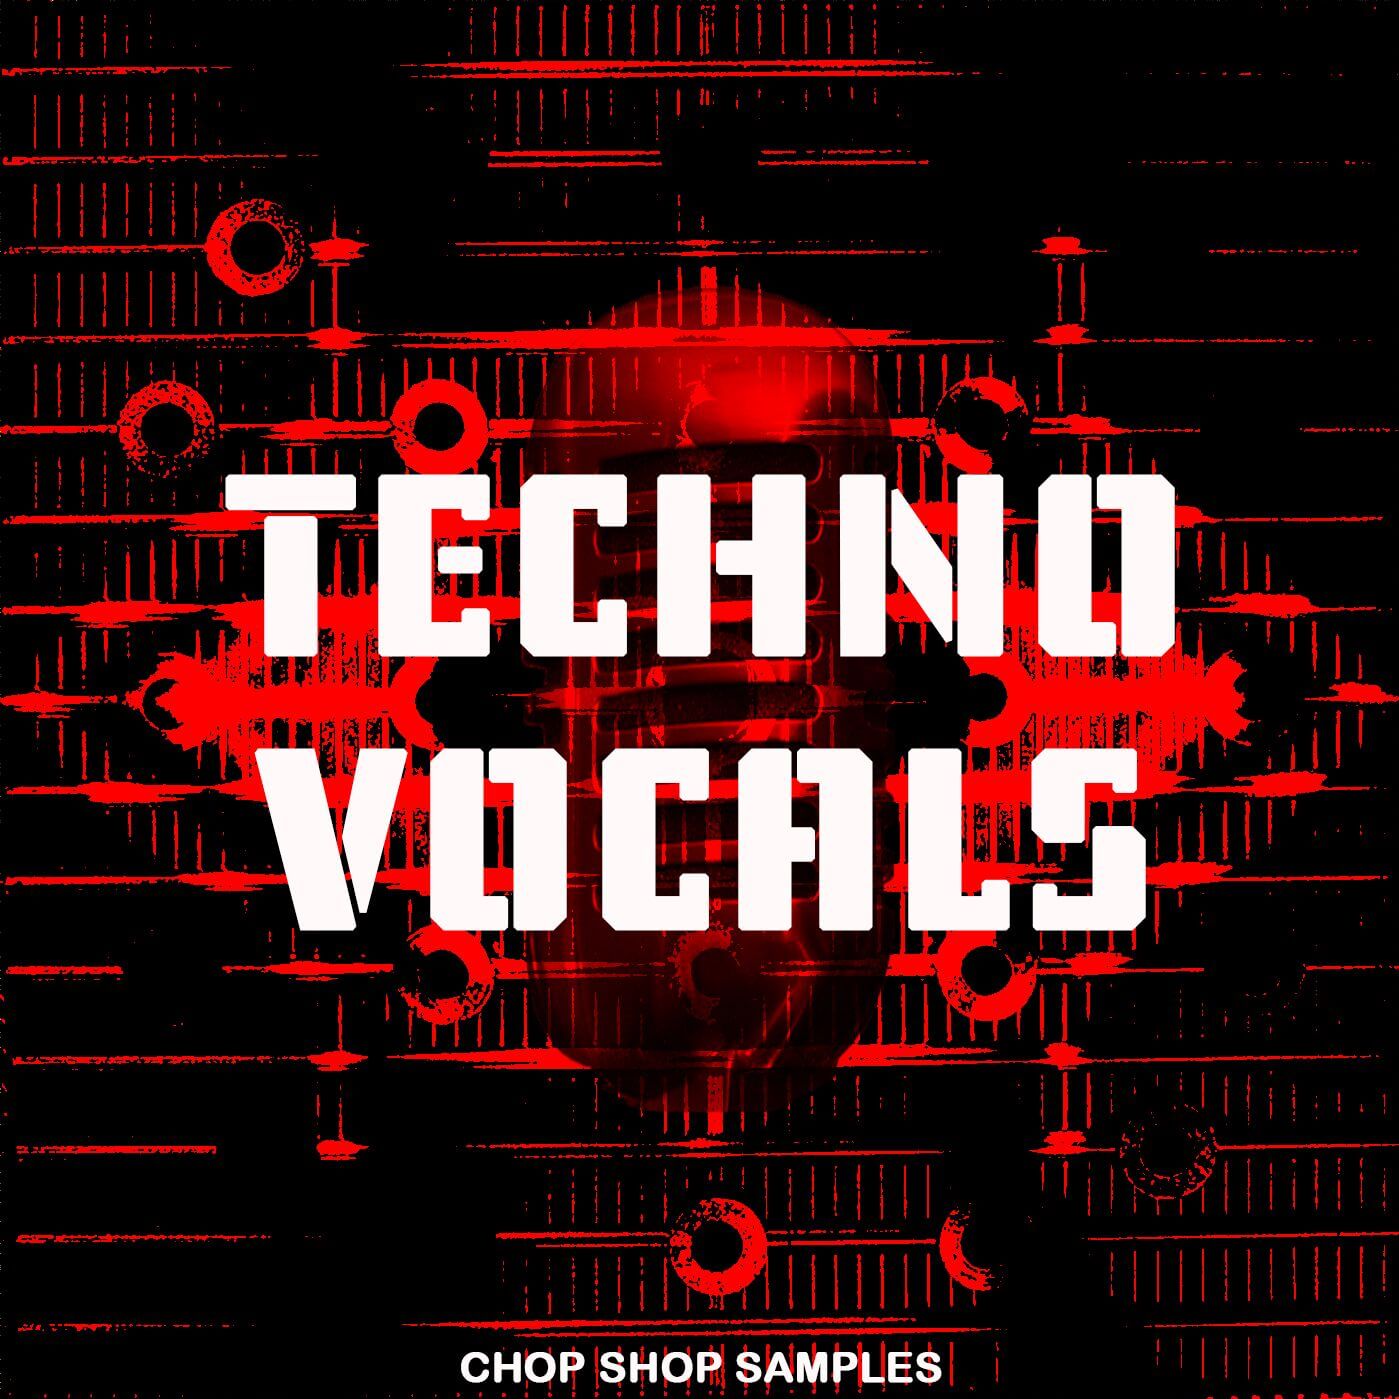 Glitch Vocals & Top Loops and Techno Vocals by Chop Shop Samples